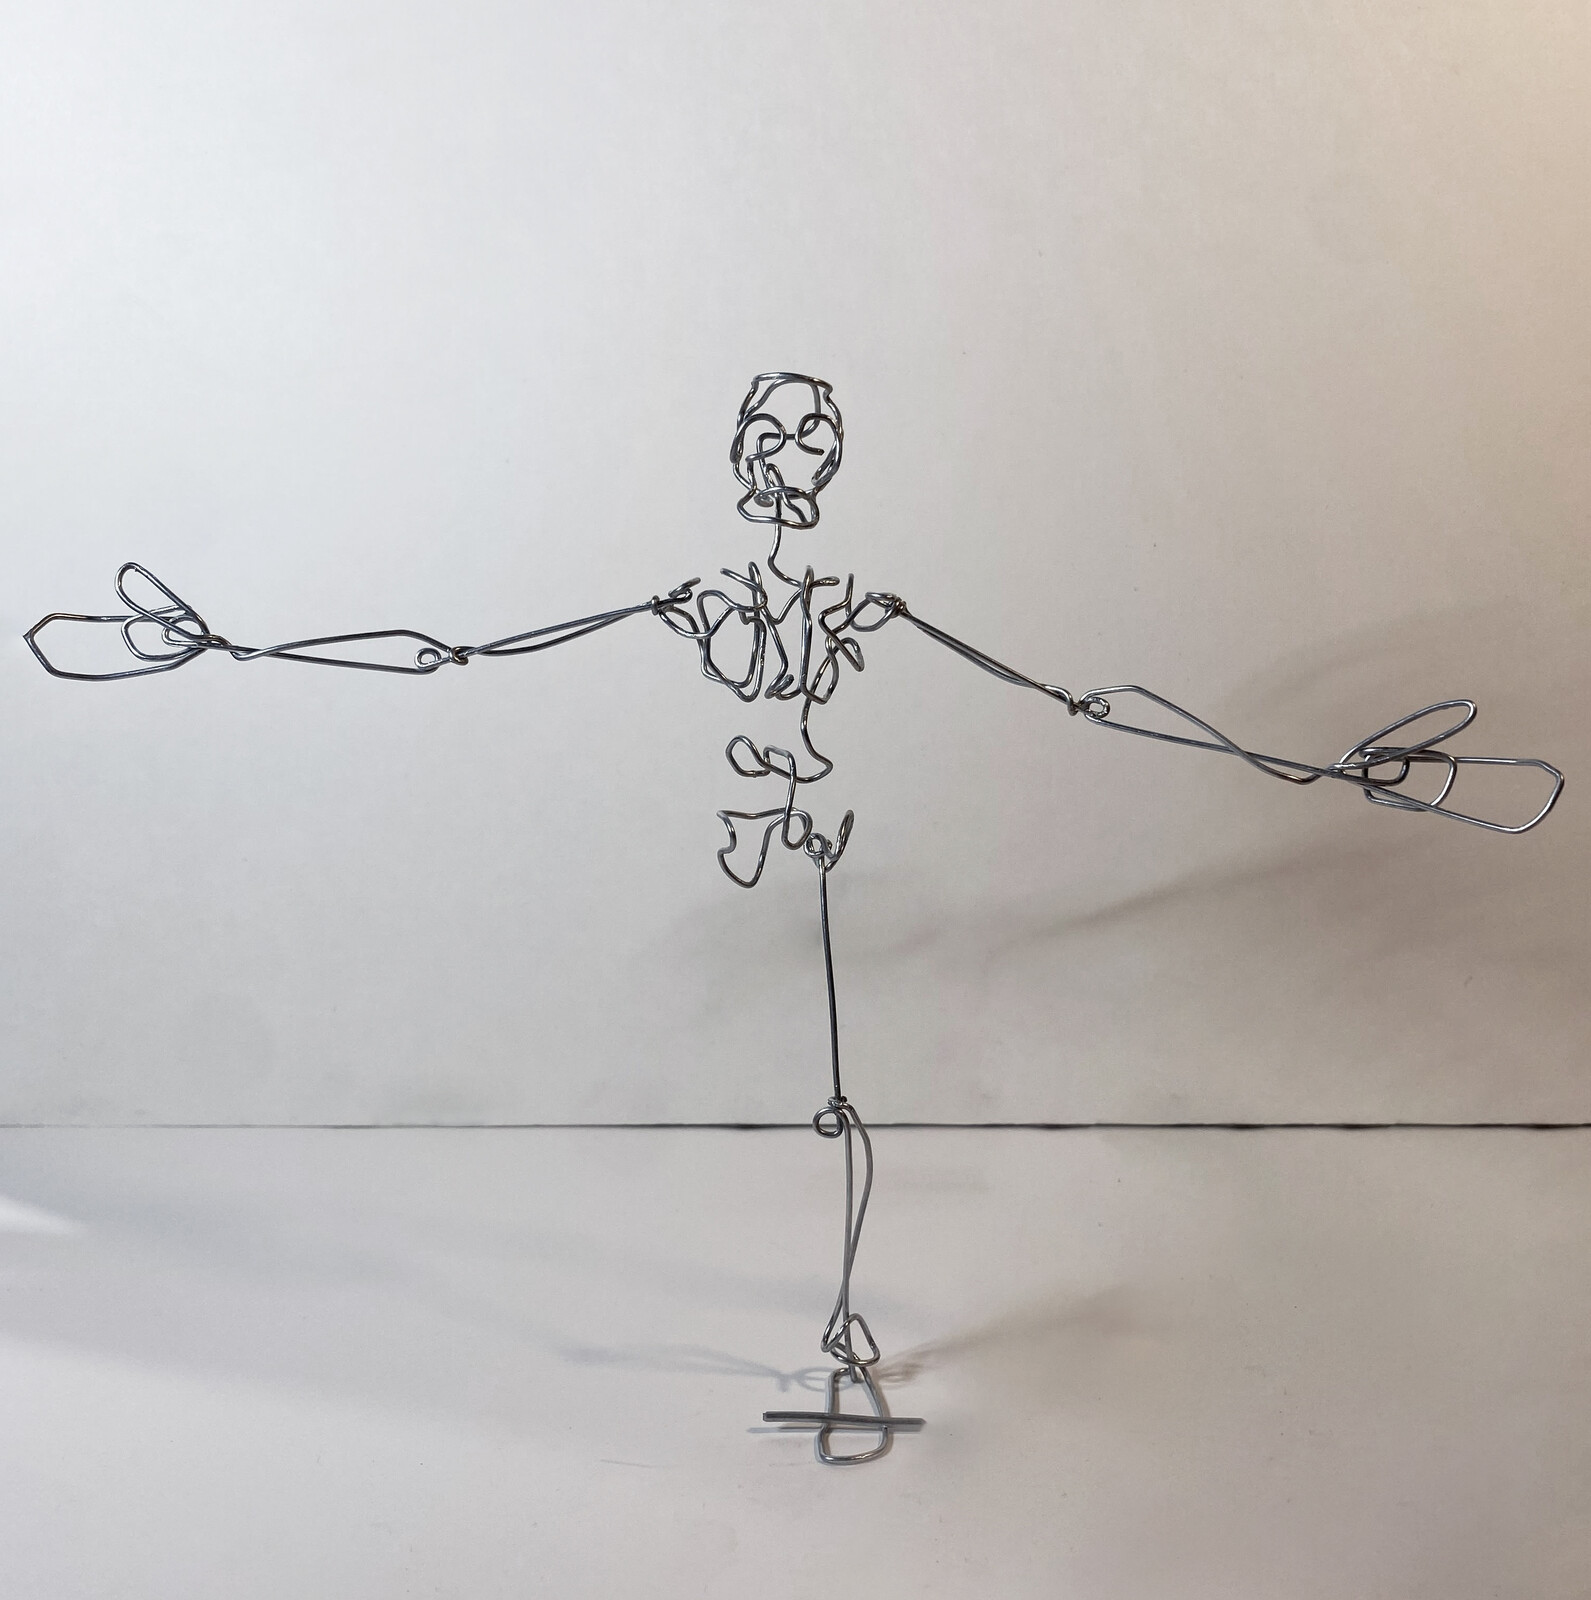 New iteration of wire man with similar face.  Body changed to have better joints for bending as a rig